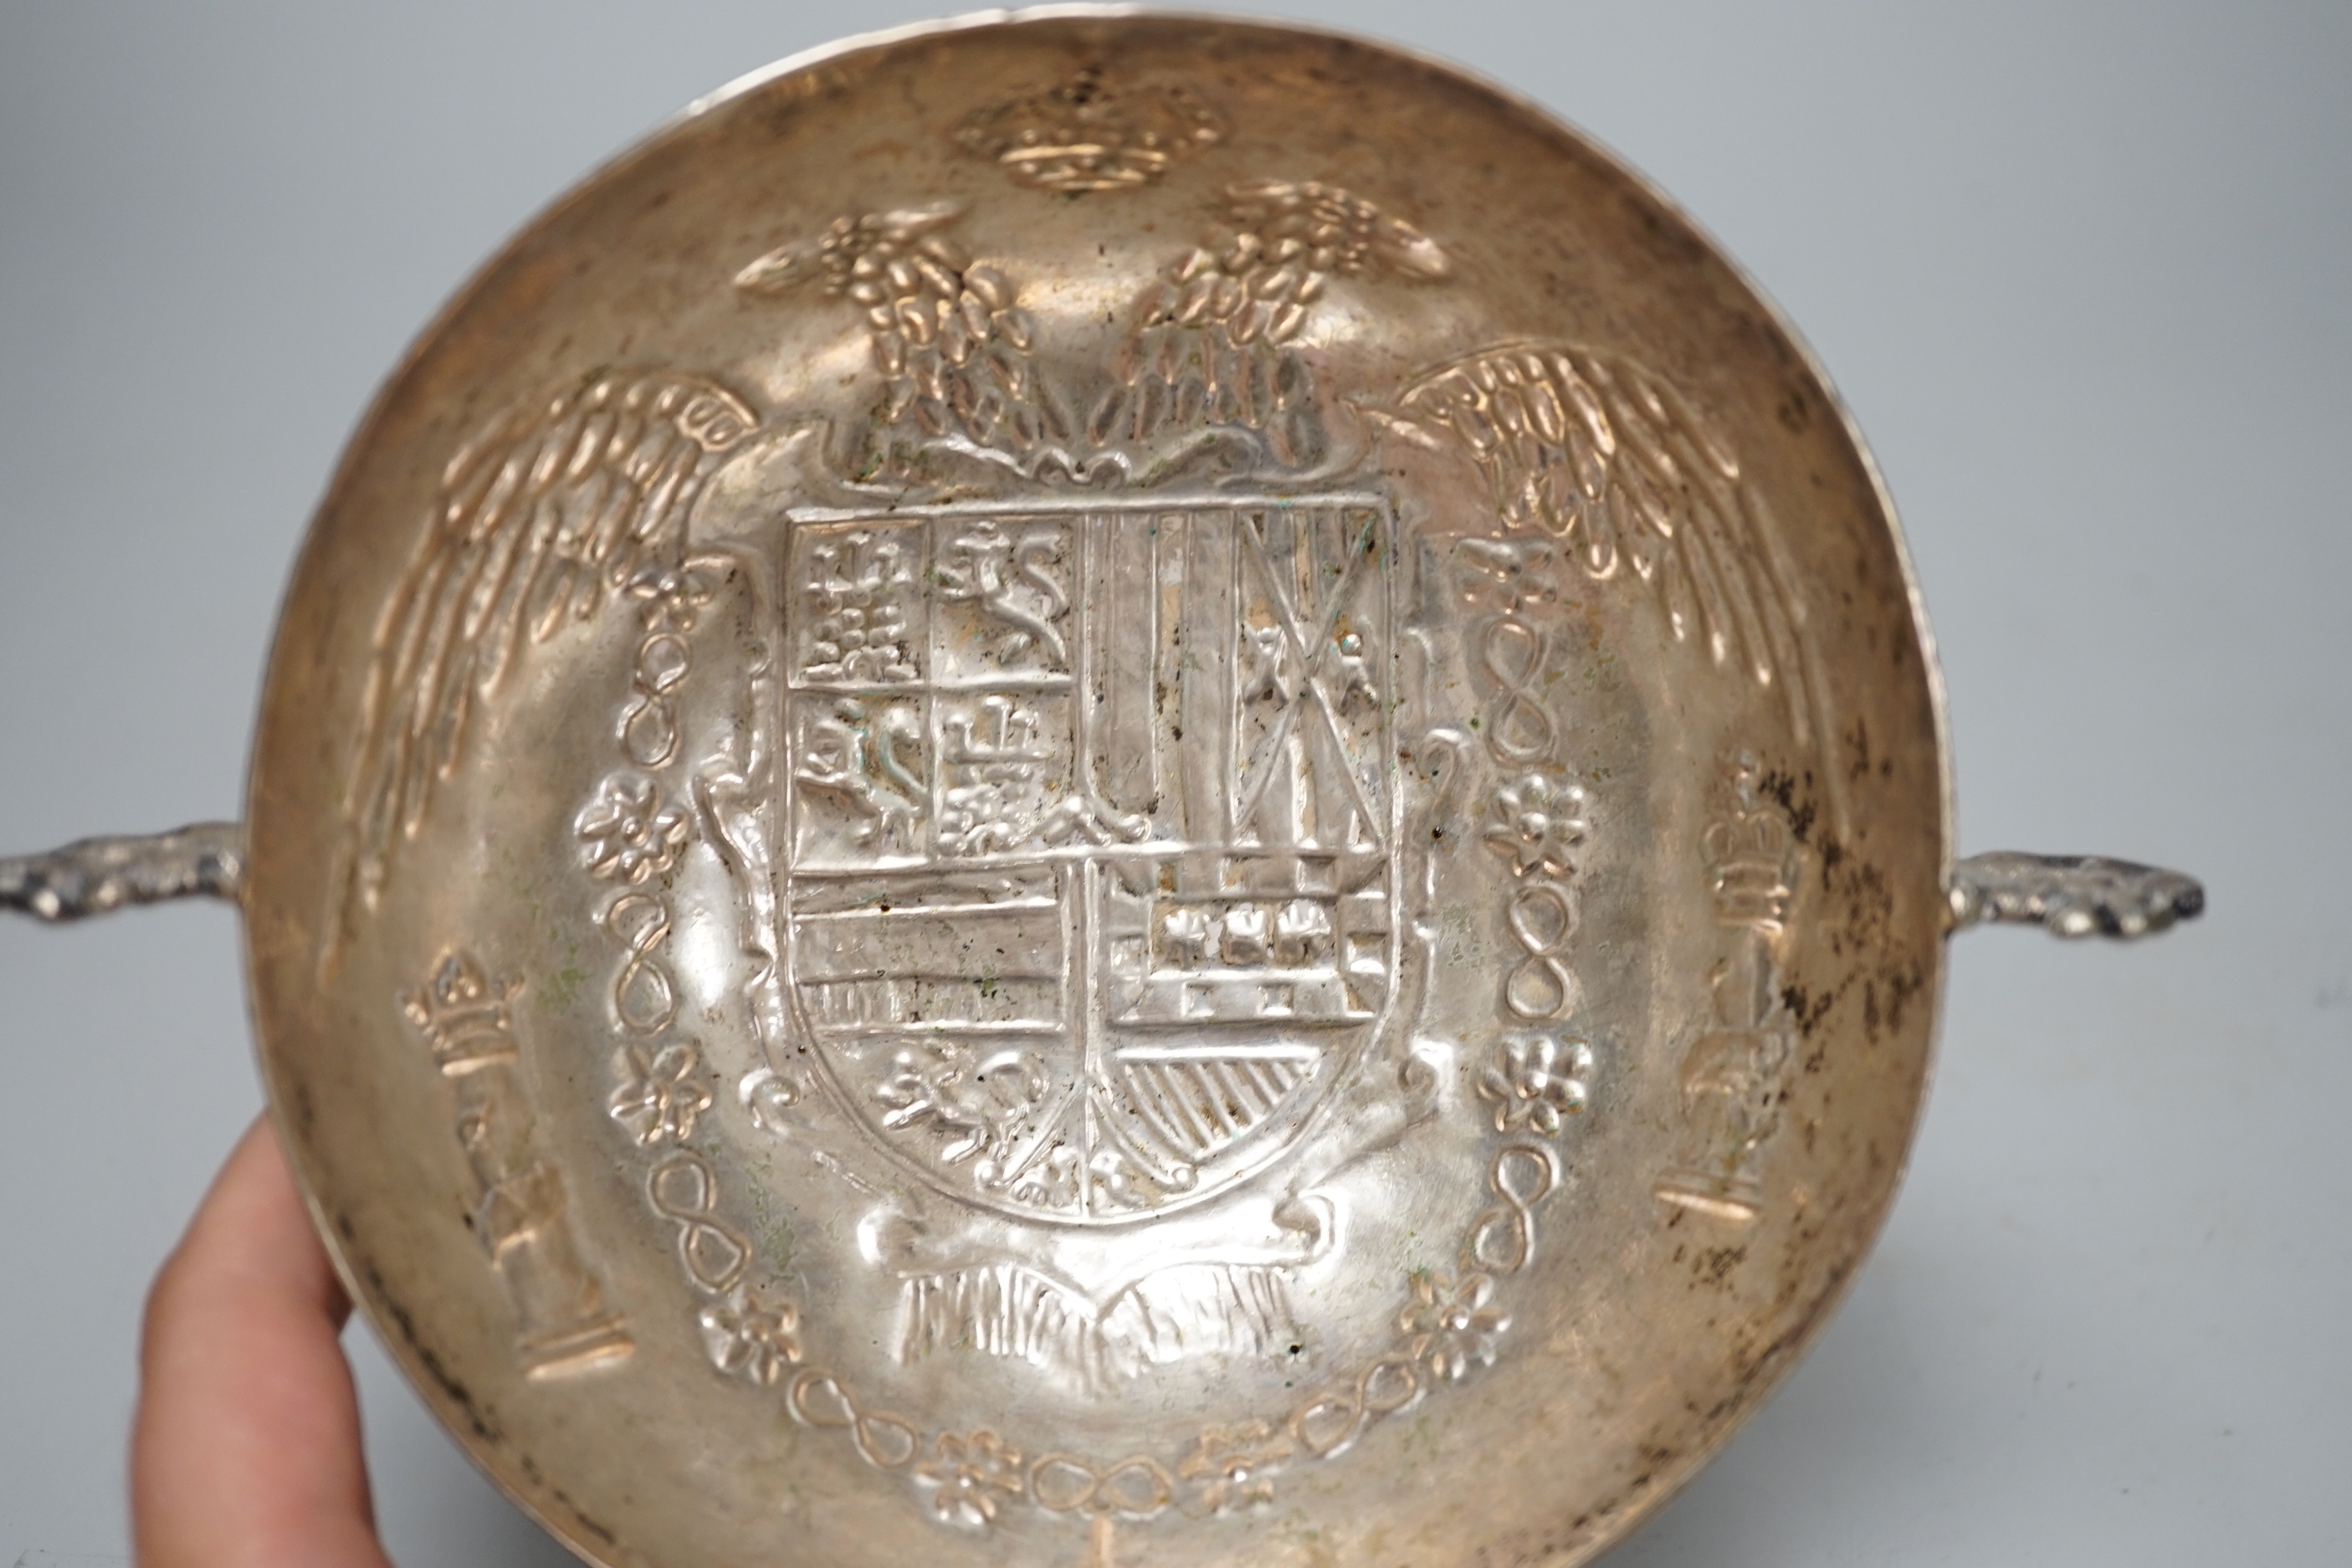 An antique continental white metal twin handled dish, embossed with a crest and double headed eagle, 19.3cm wide overall